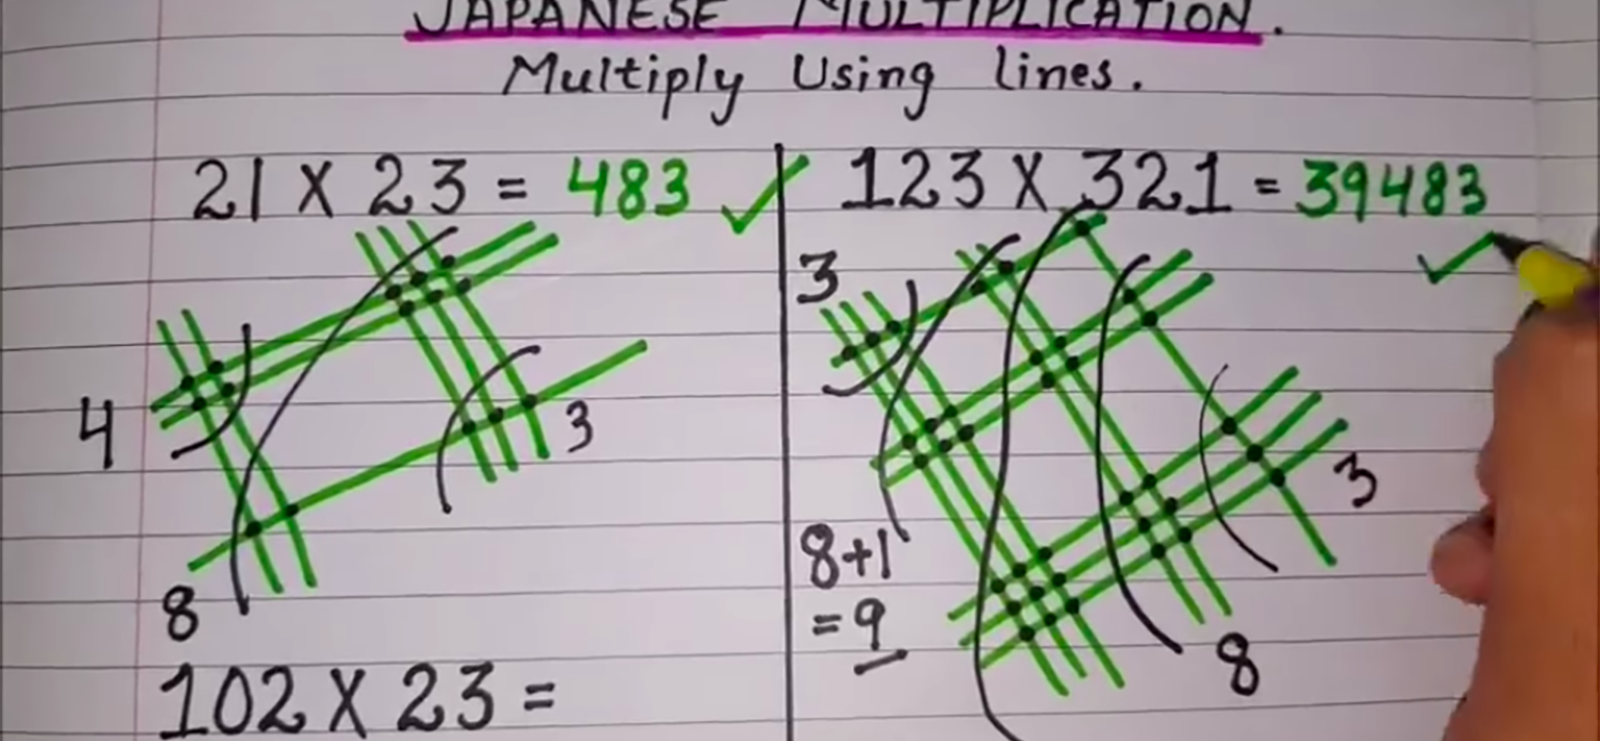 japanese-multiplication-multiply-using-lines-math-trick-math-for-excellence